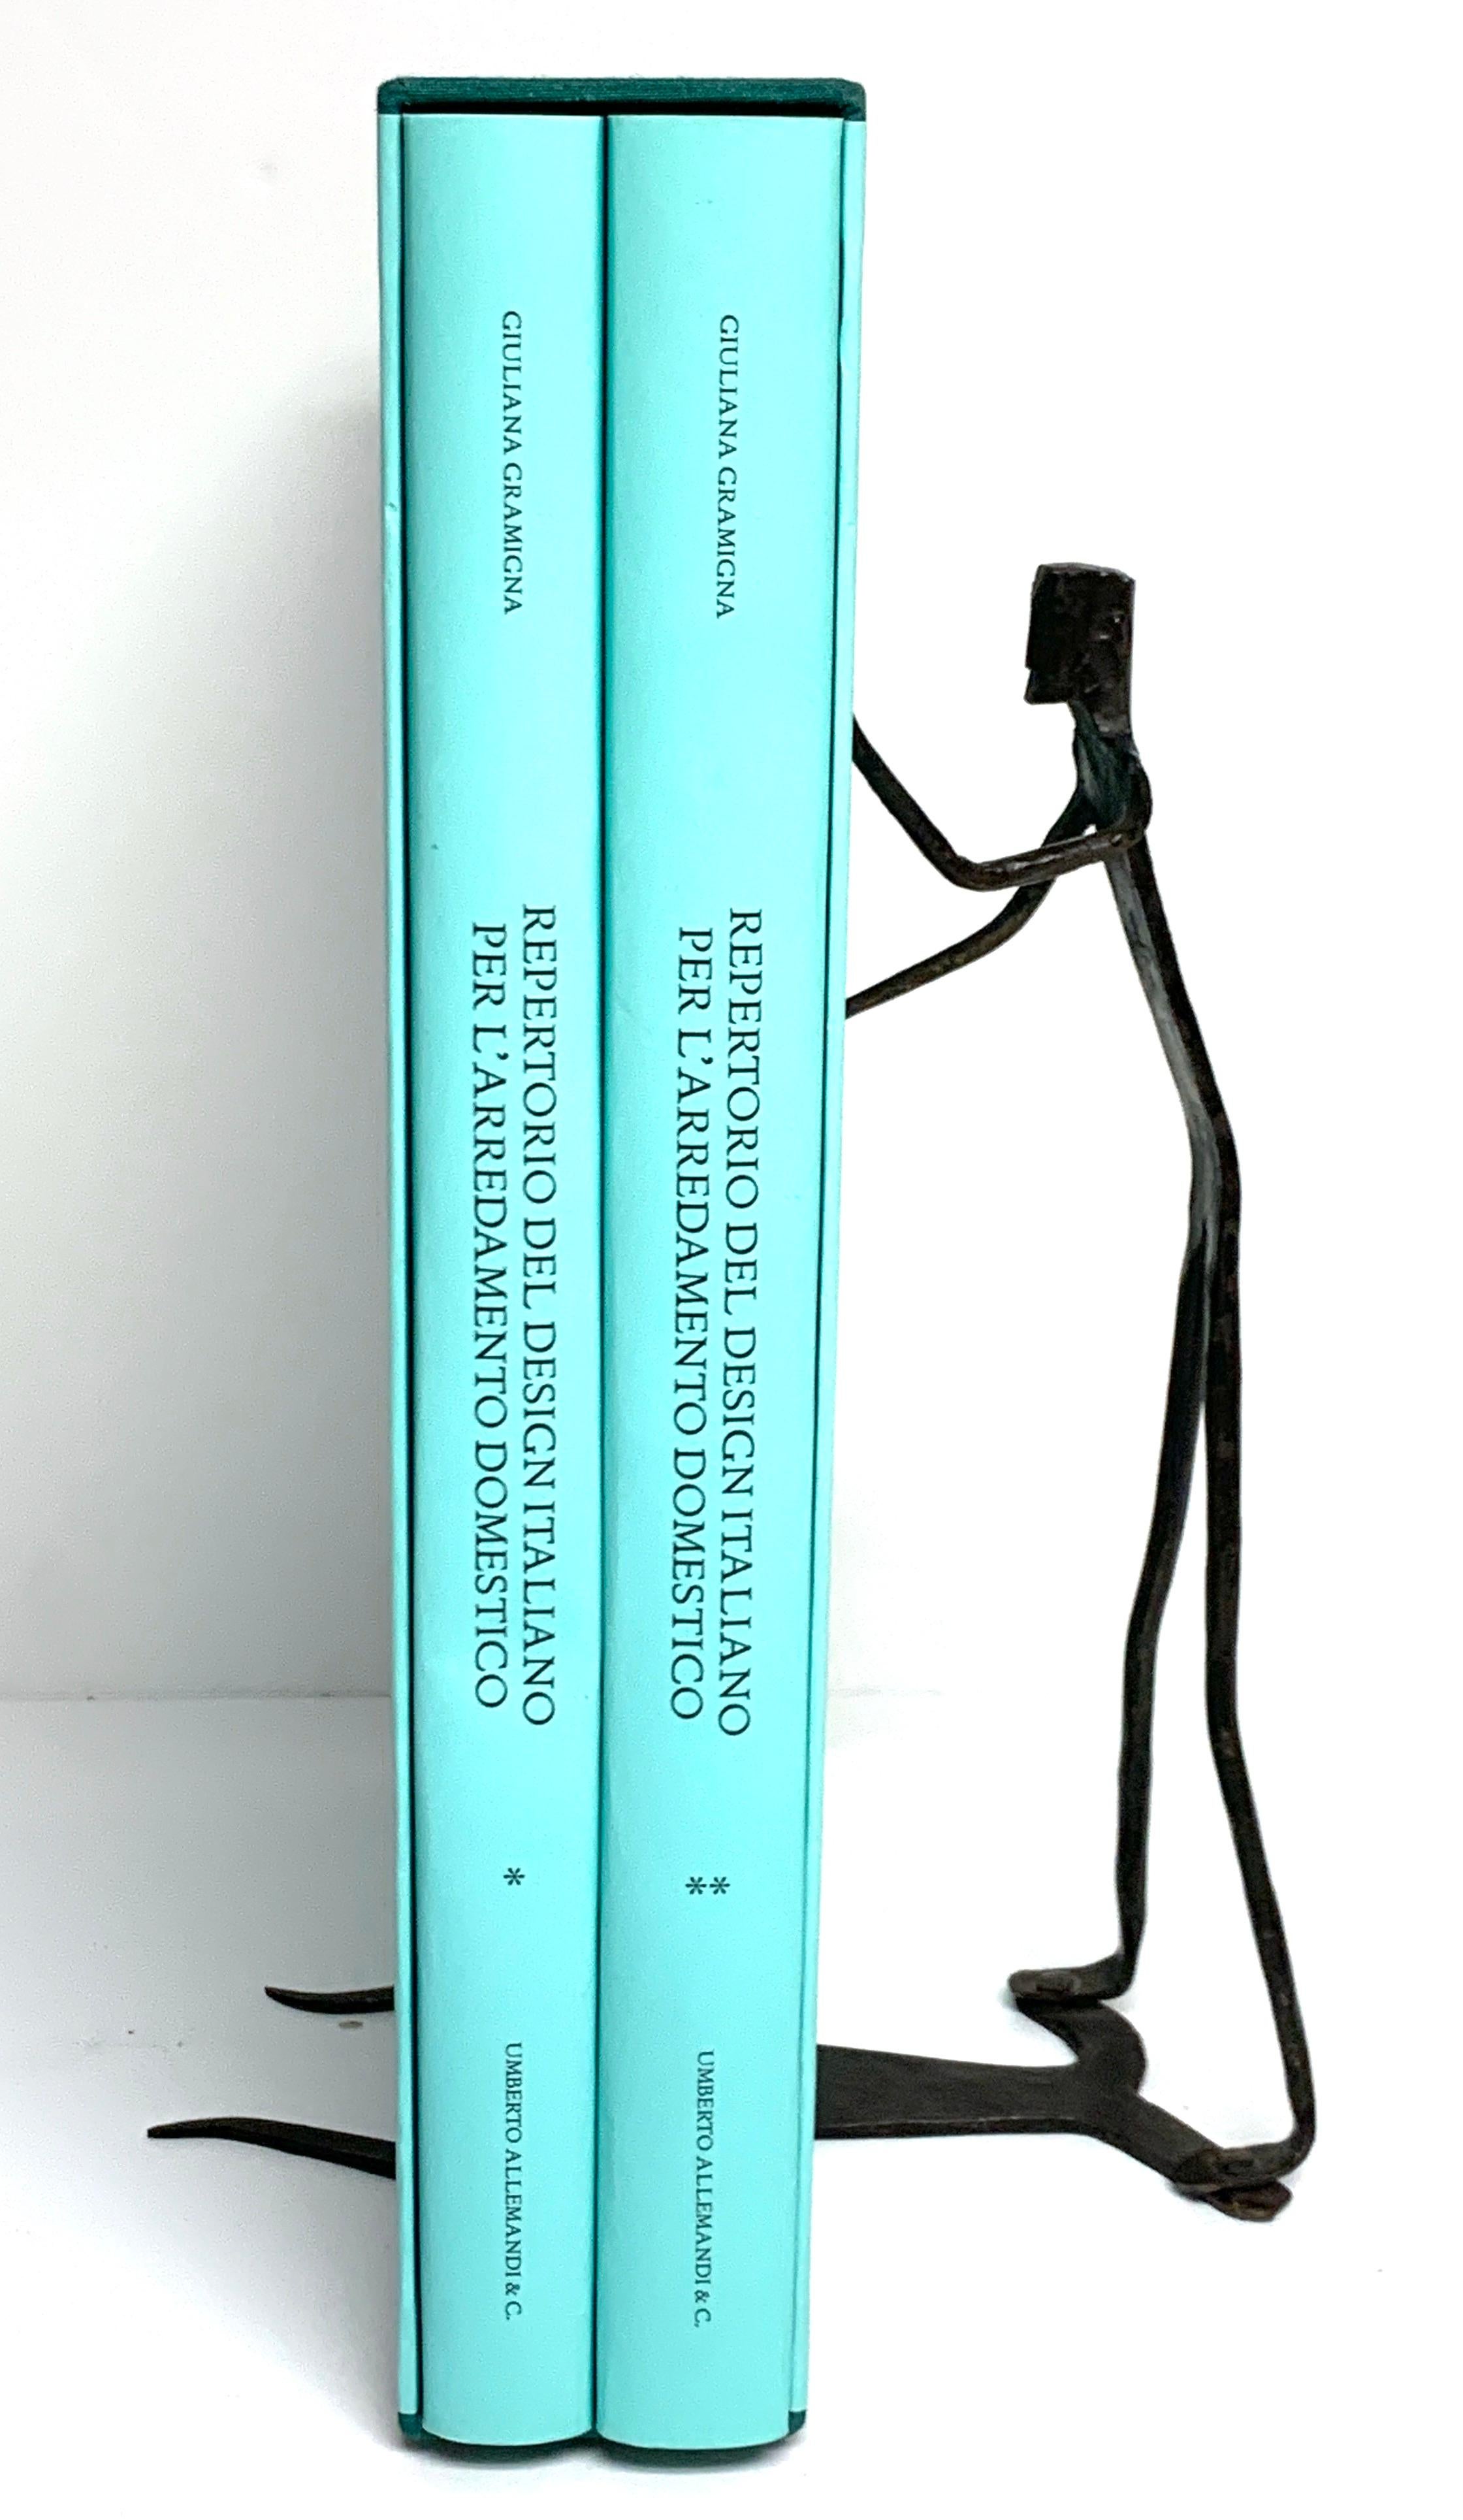 European Wrought Iron Walking Man and Shadow Bookends For Sale